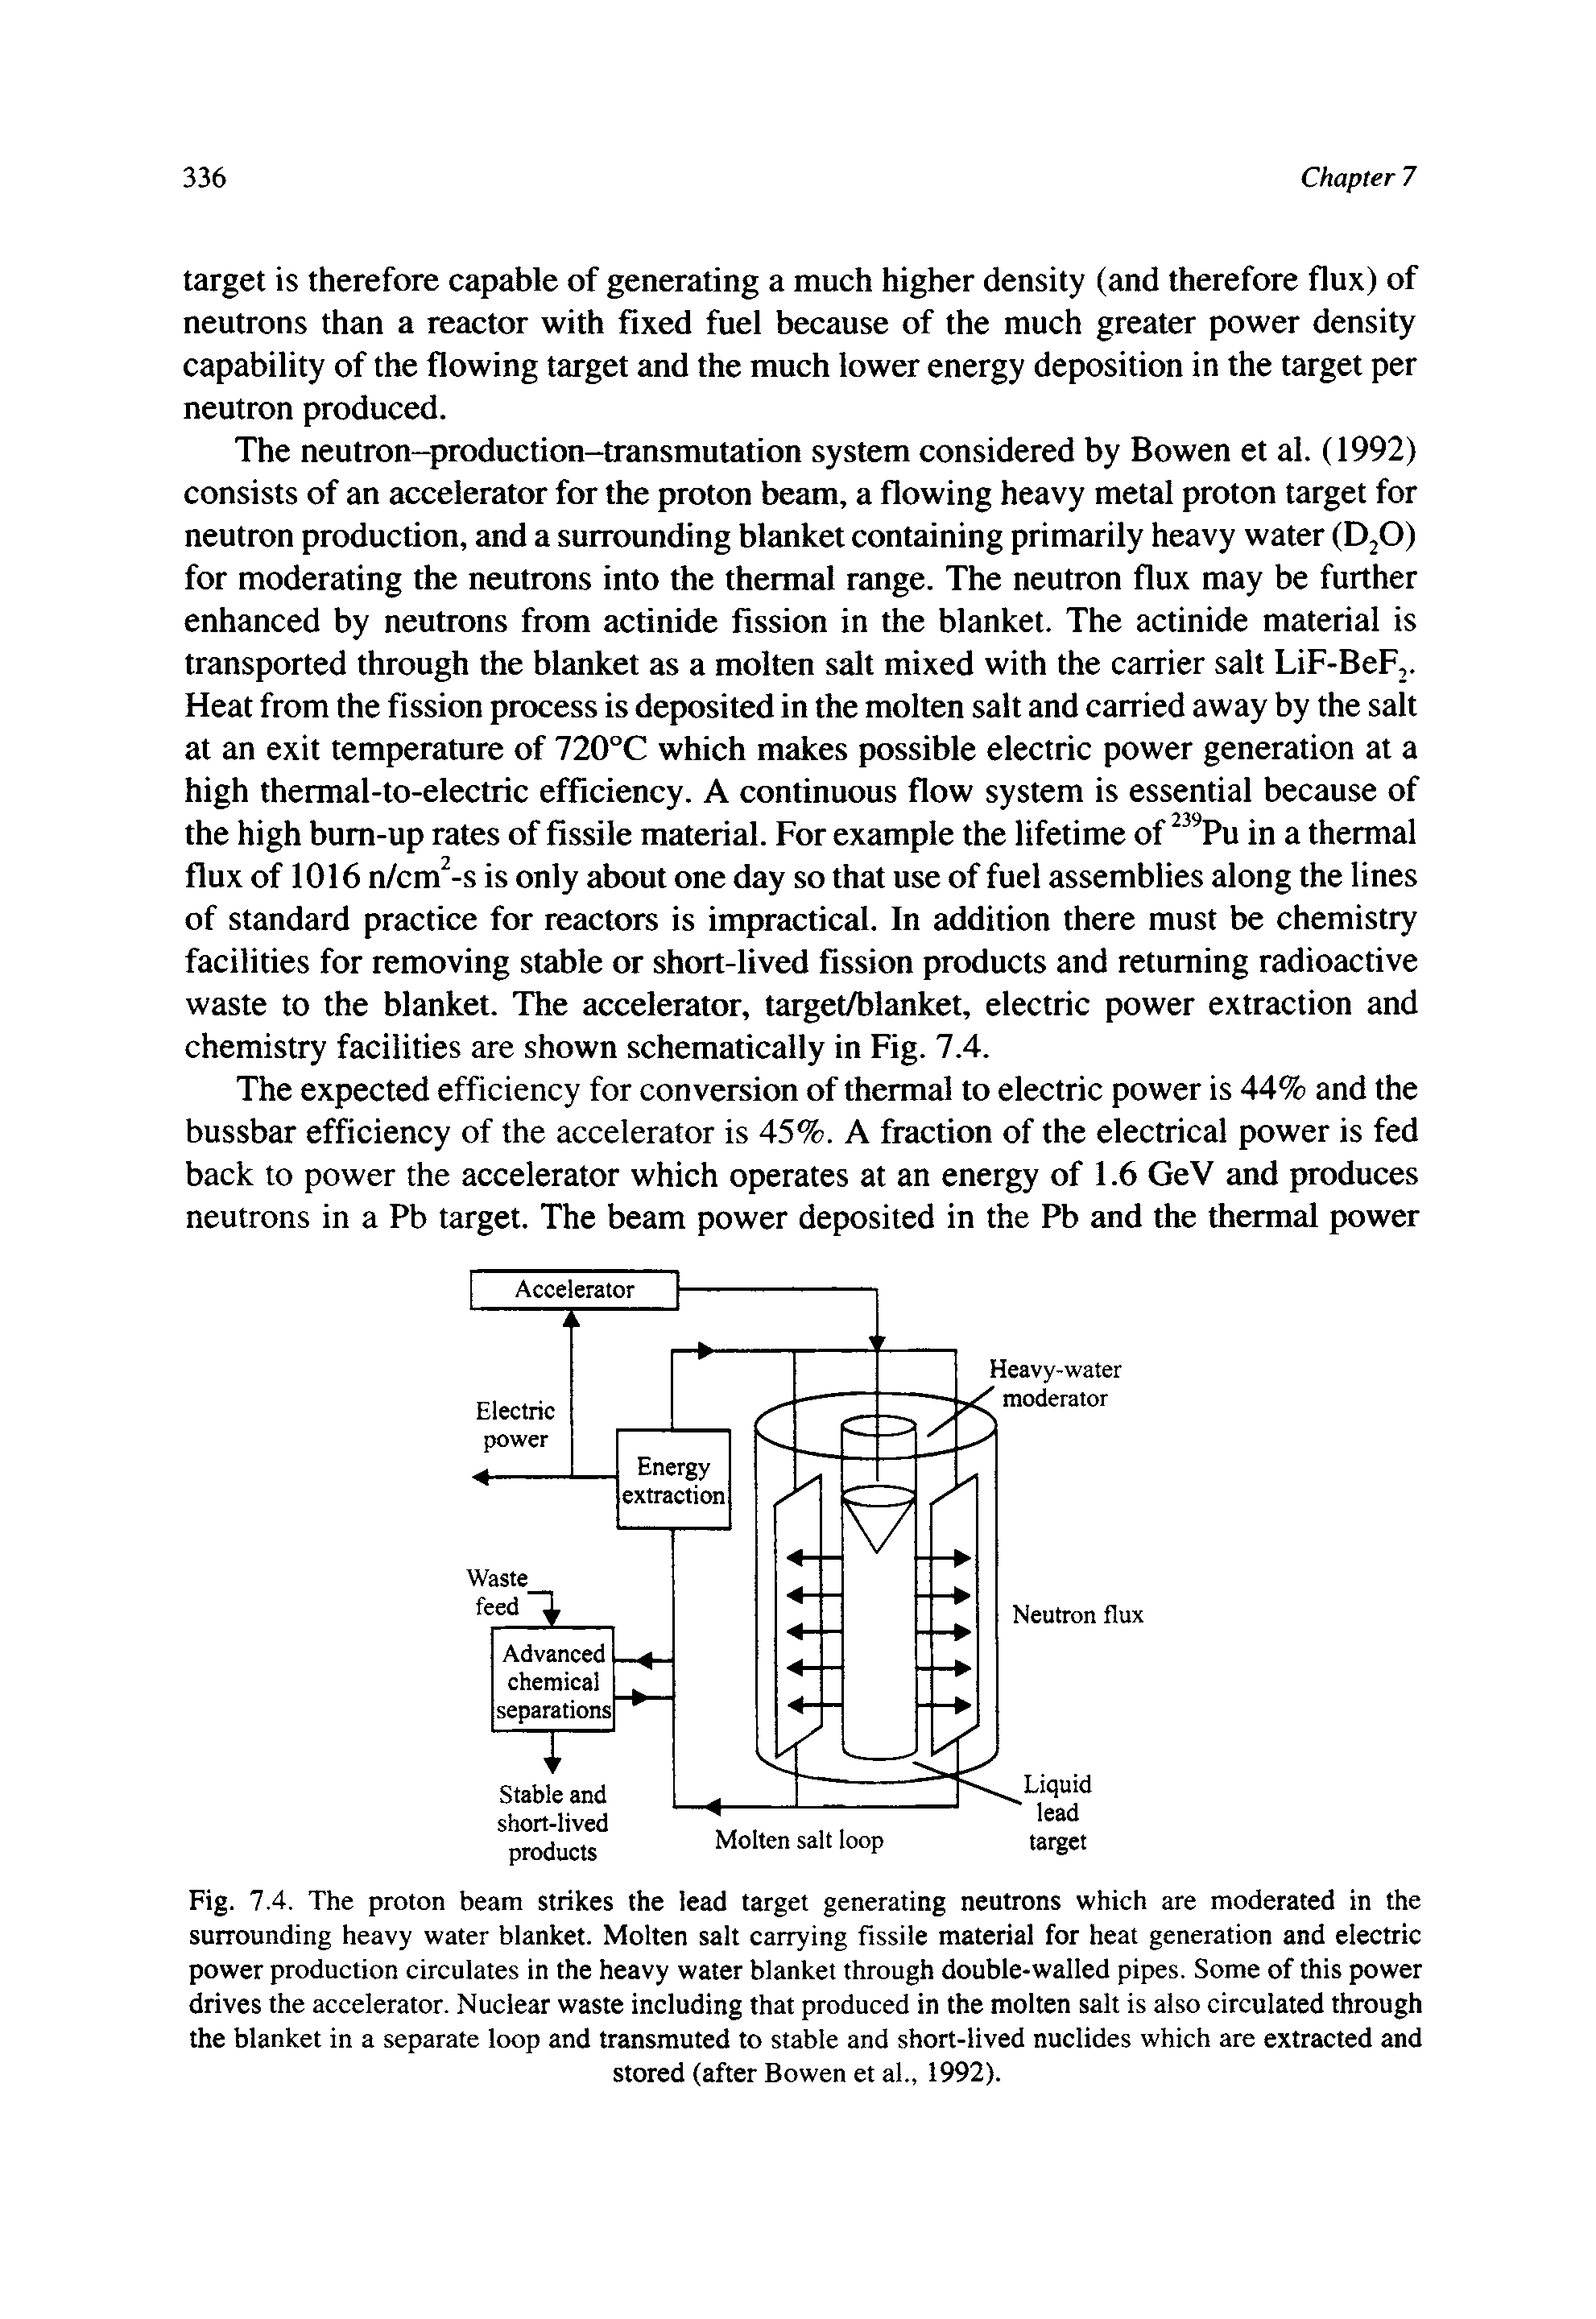 Fig. 7.4. The proton beam strikes the lead target generating neutrons which are moderated in the surrounding heavy water blanket. Molten salt carrying fissile material for heat generation and electric power production circulates in the heavy water blanket through double-walled pipes. Some of this power drives the accelerator. Nuclear waste including that produced in the molten salt is also circulated through the blanket in a separate loop and transmuted to stable and short-lived nuclides which are extracted and...